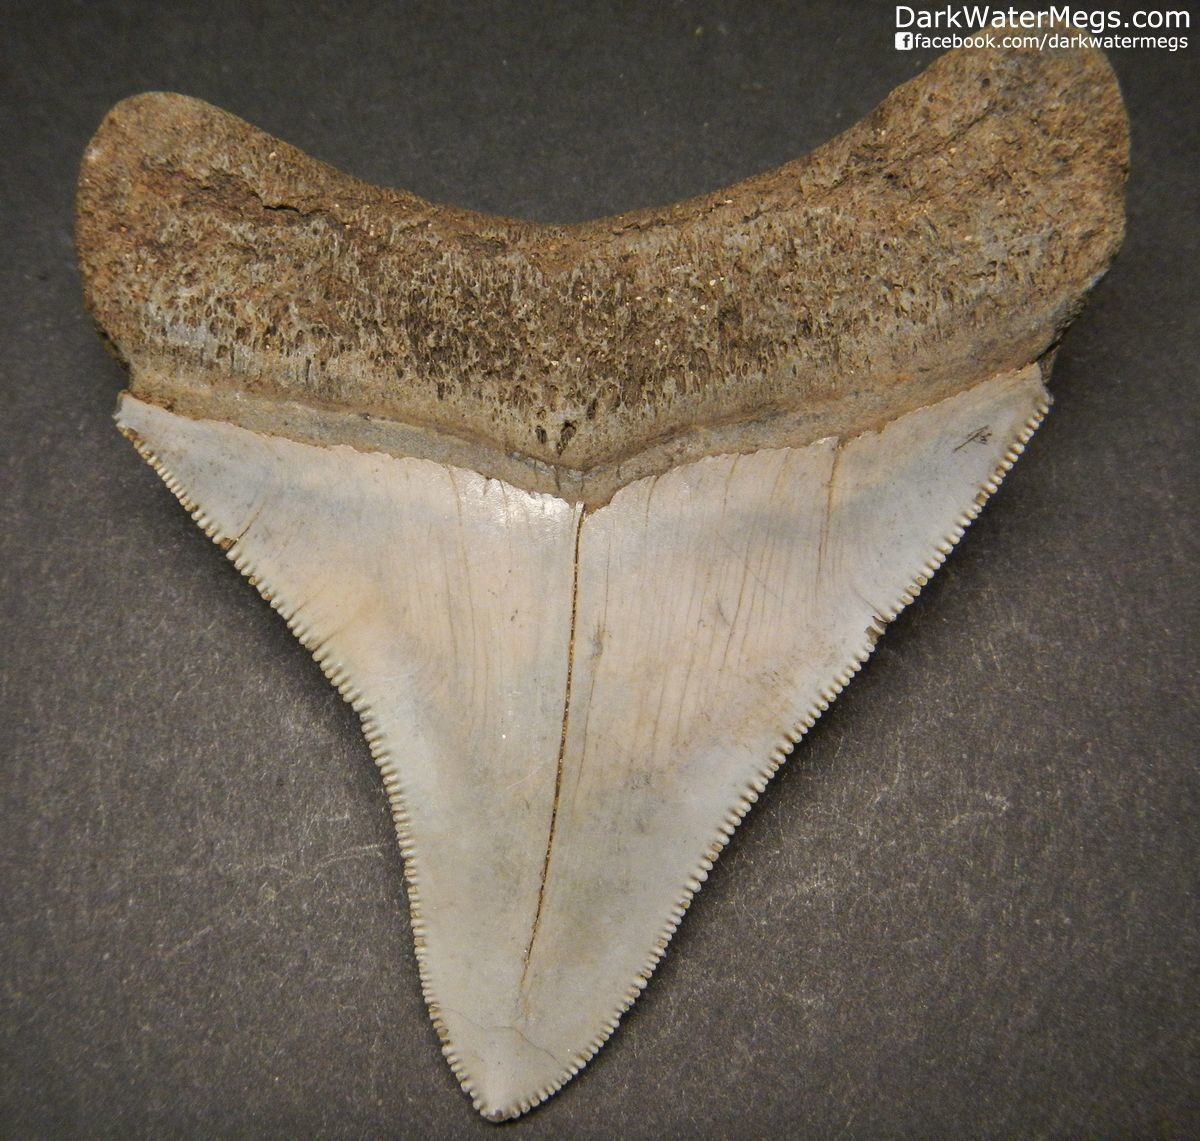 3.26" Sharply Serrated Megalodon Tooth